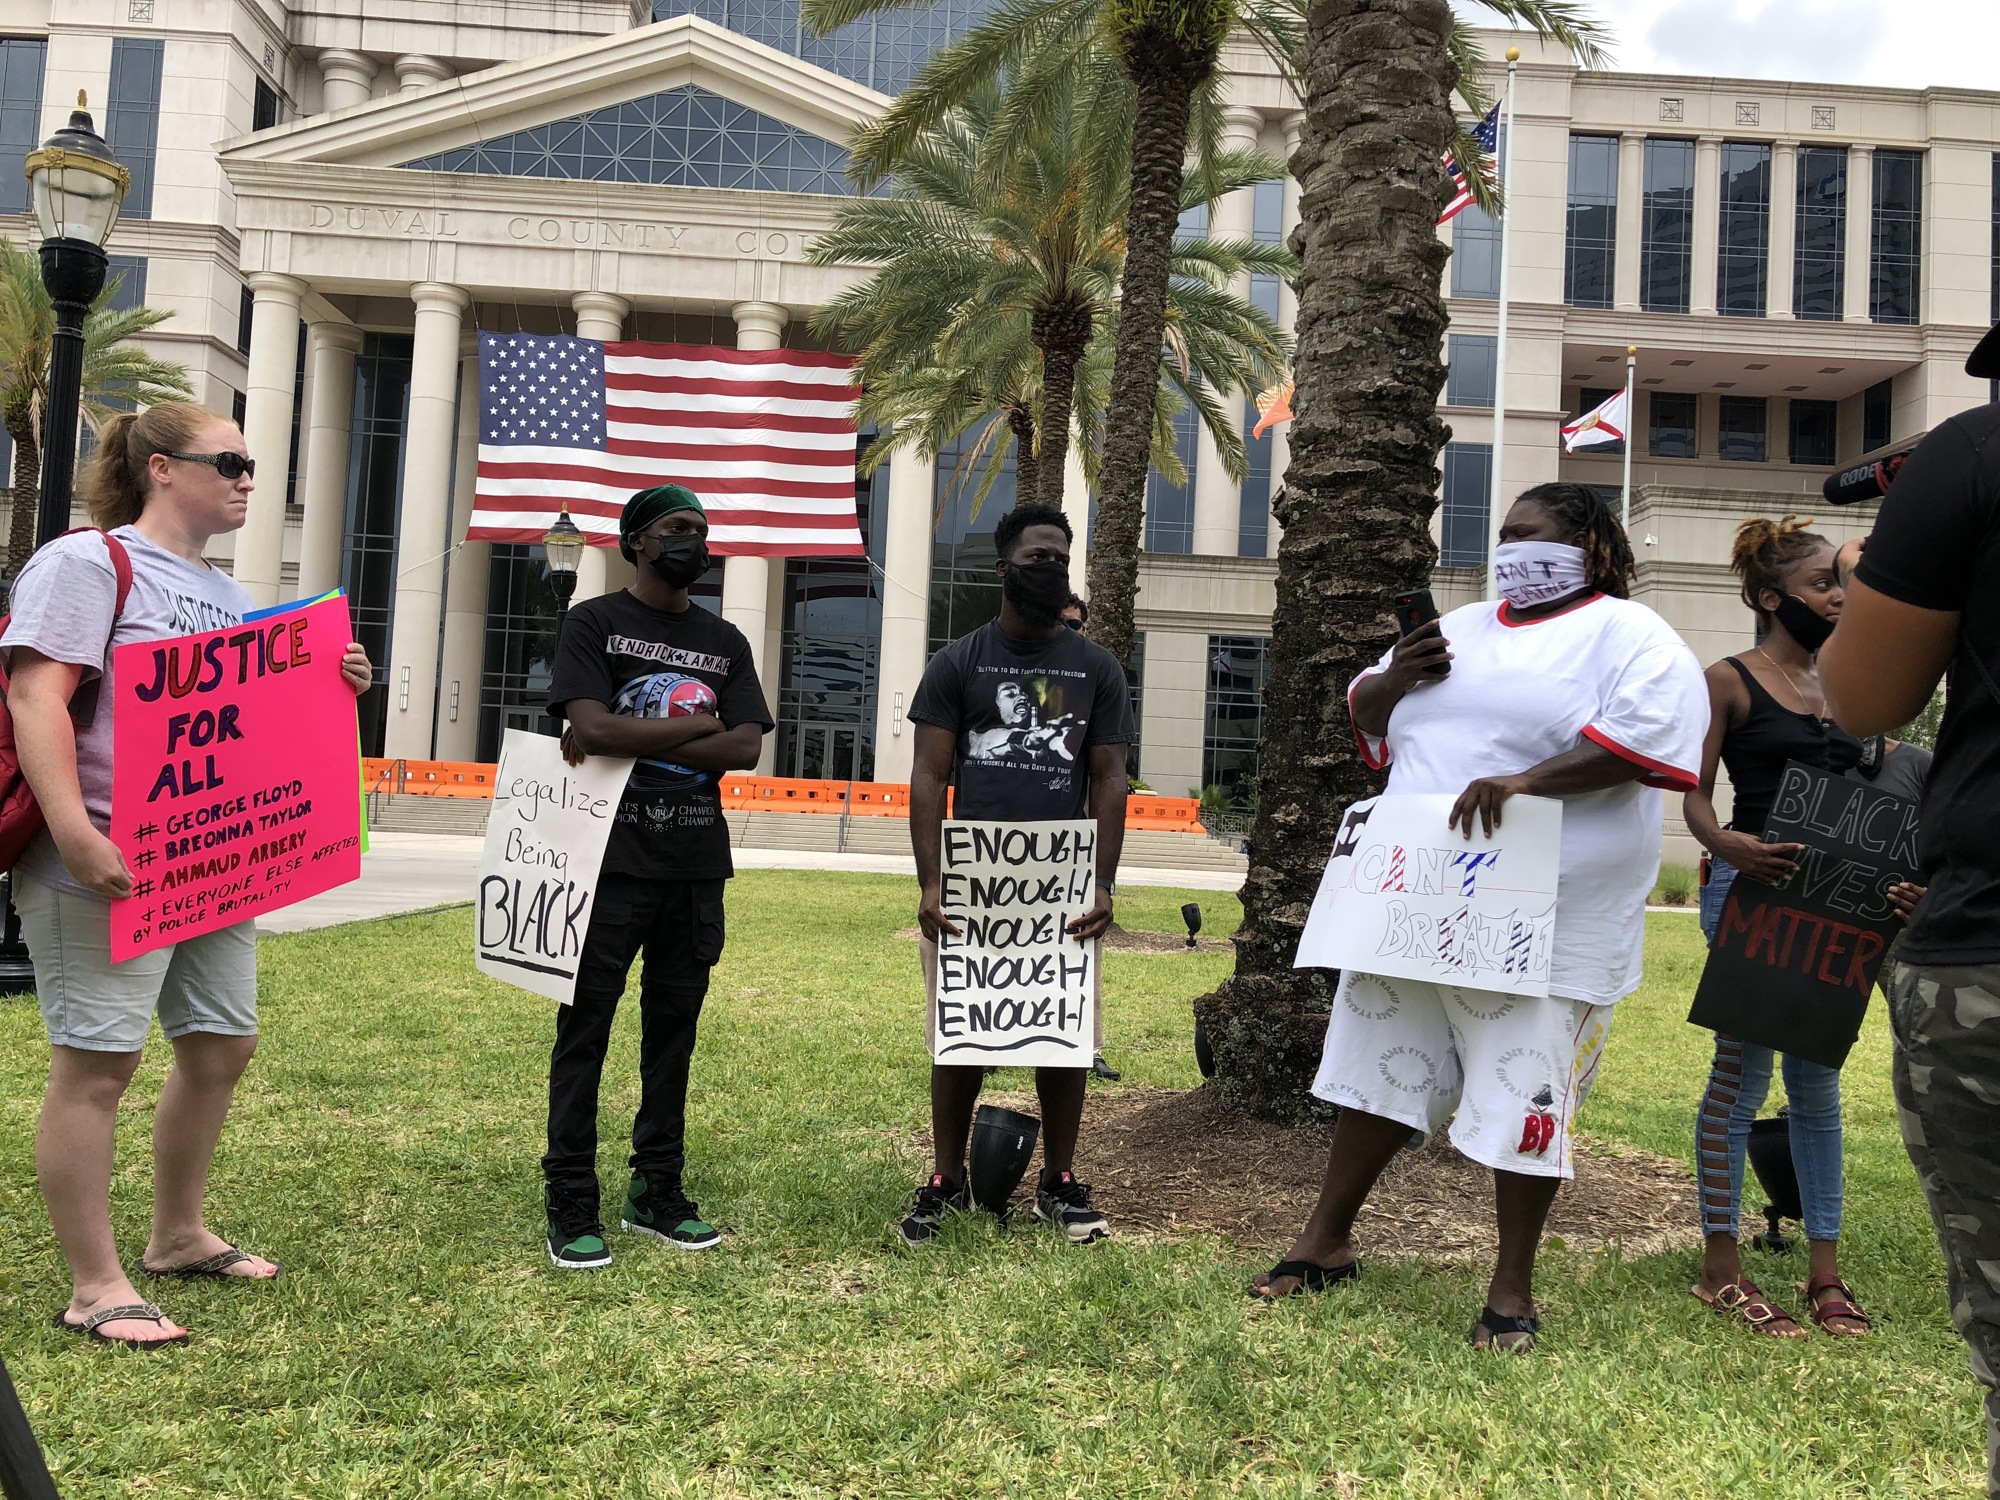 Protestors outside the Duval County Courthouse on June 1. (Mike Mendenhall)